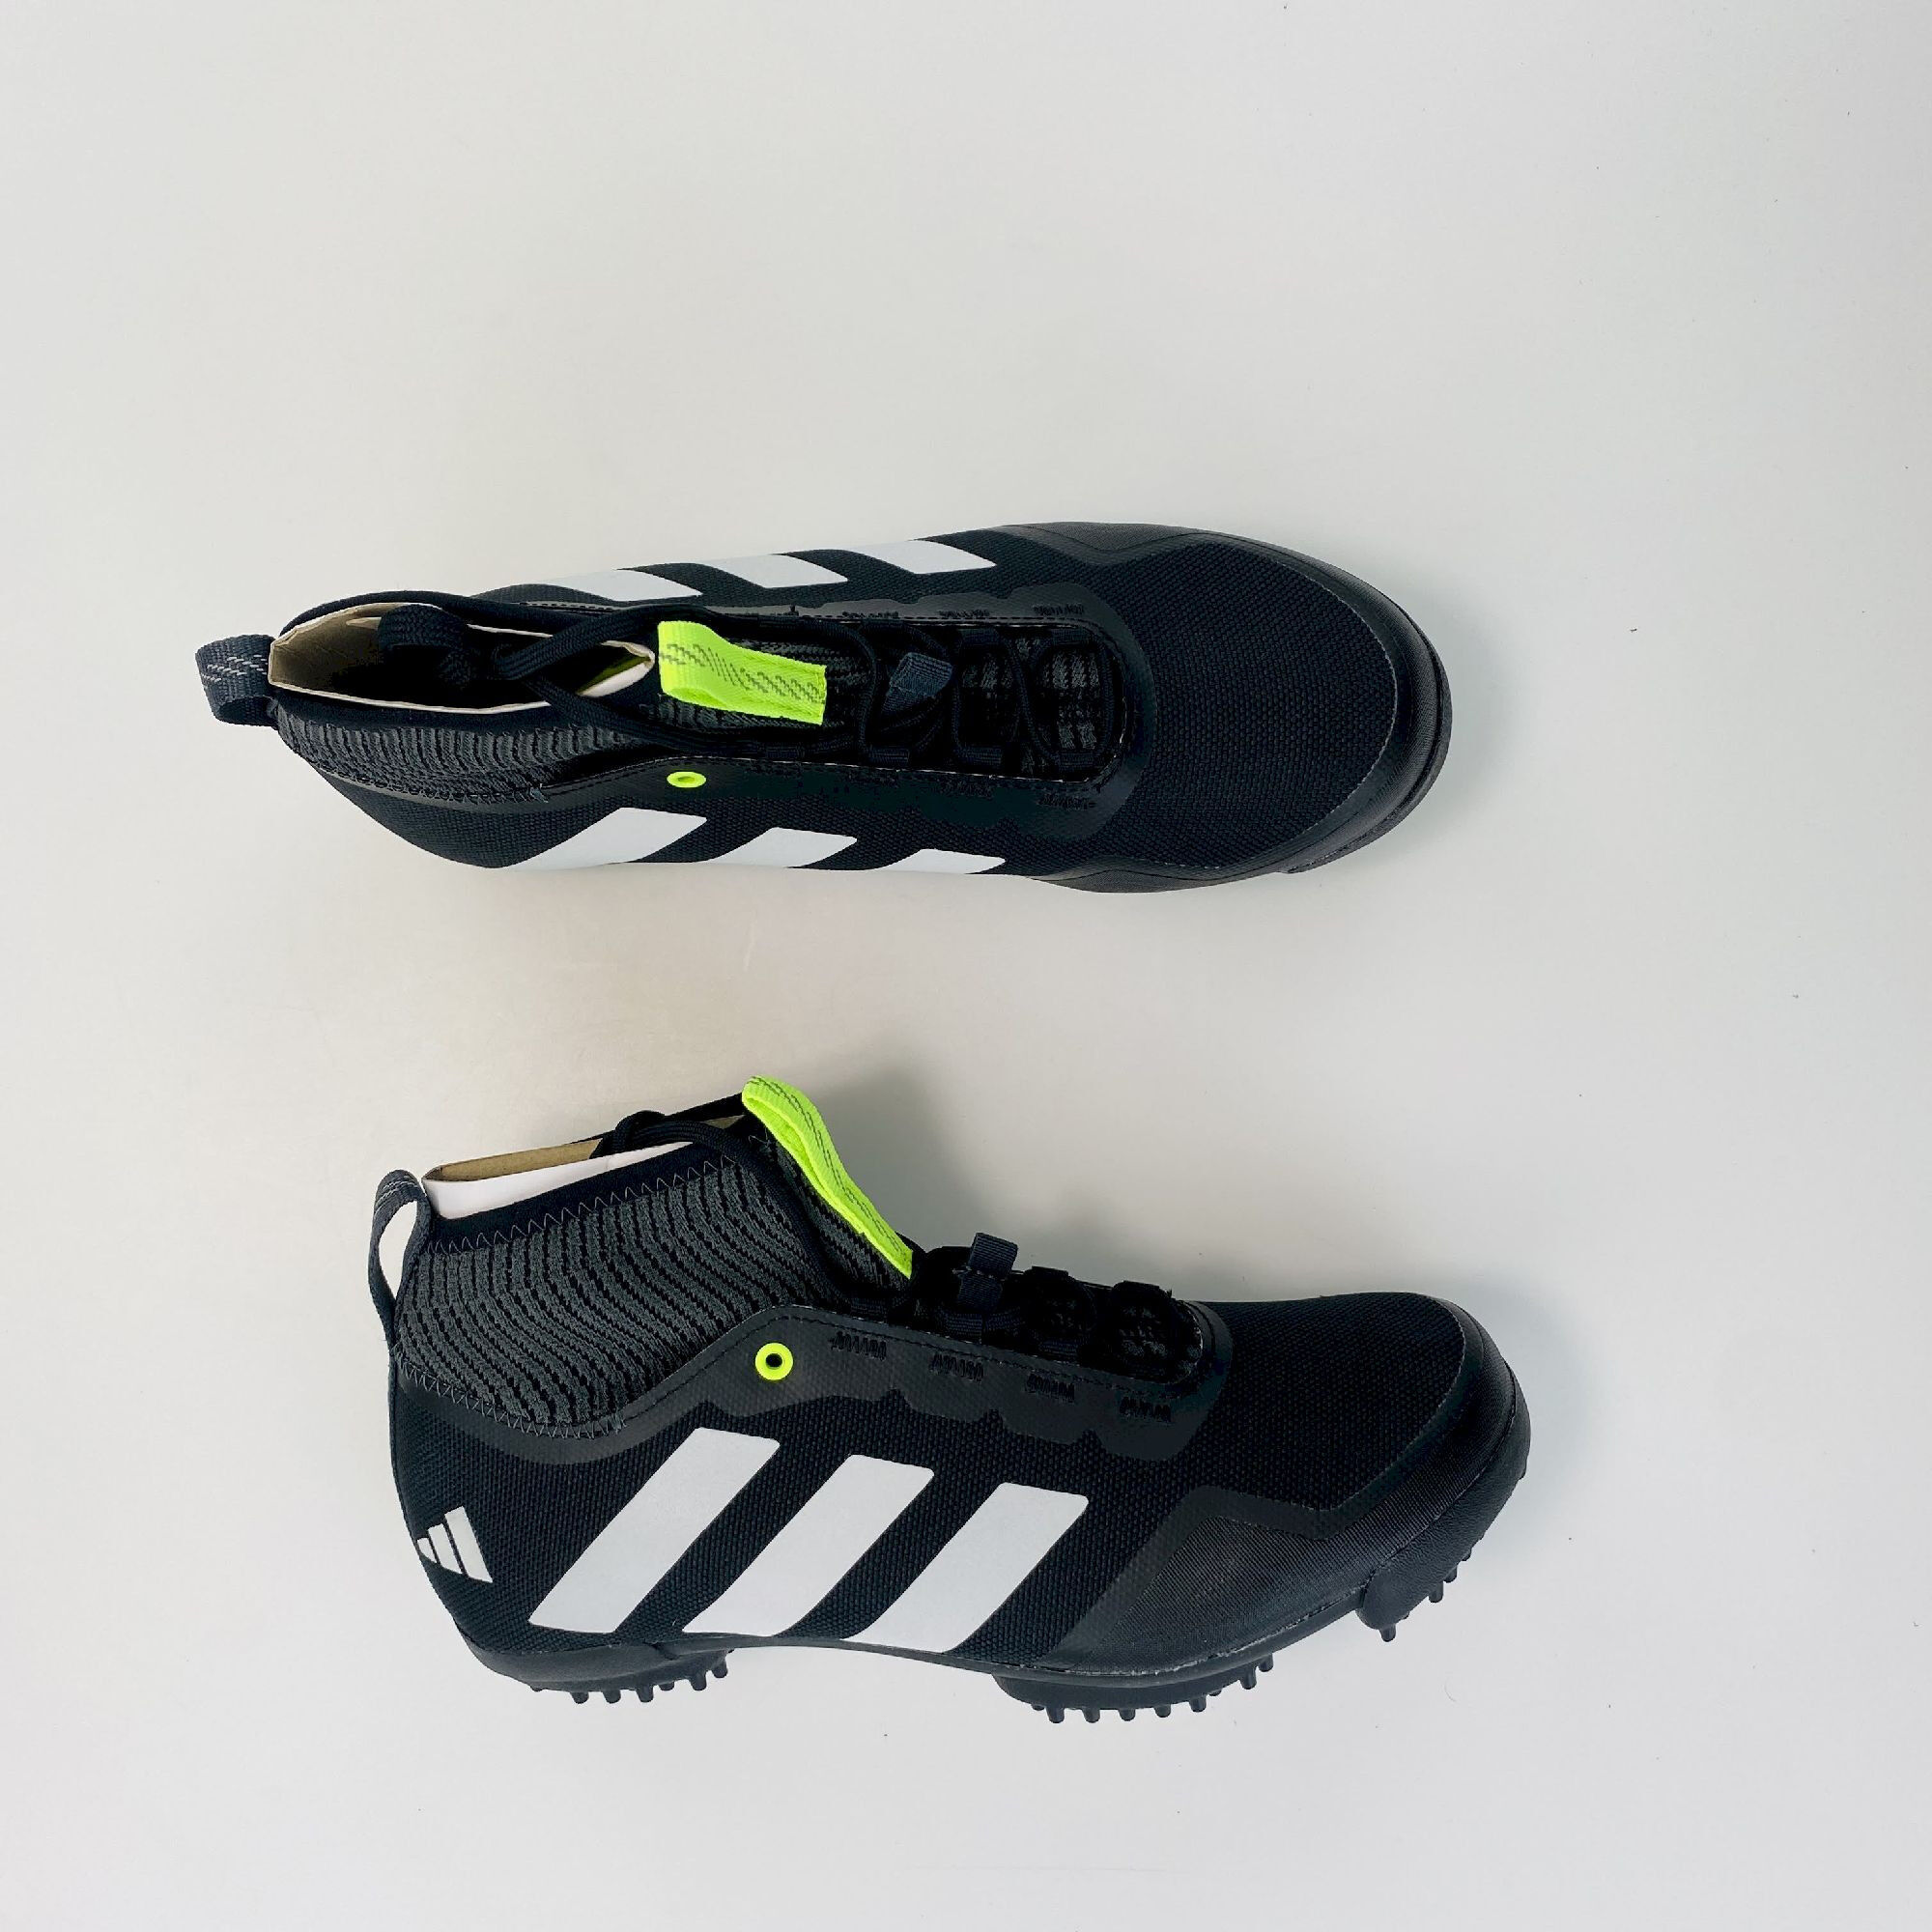 adidas The Gravel shoes - Seconde main Chaussures vélo - Noir - 38.2/3 | Hardloop